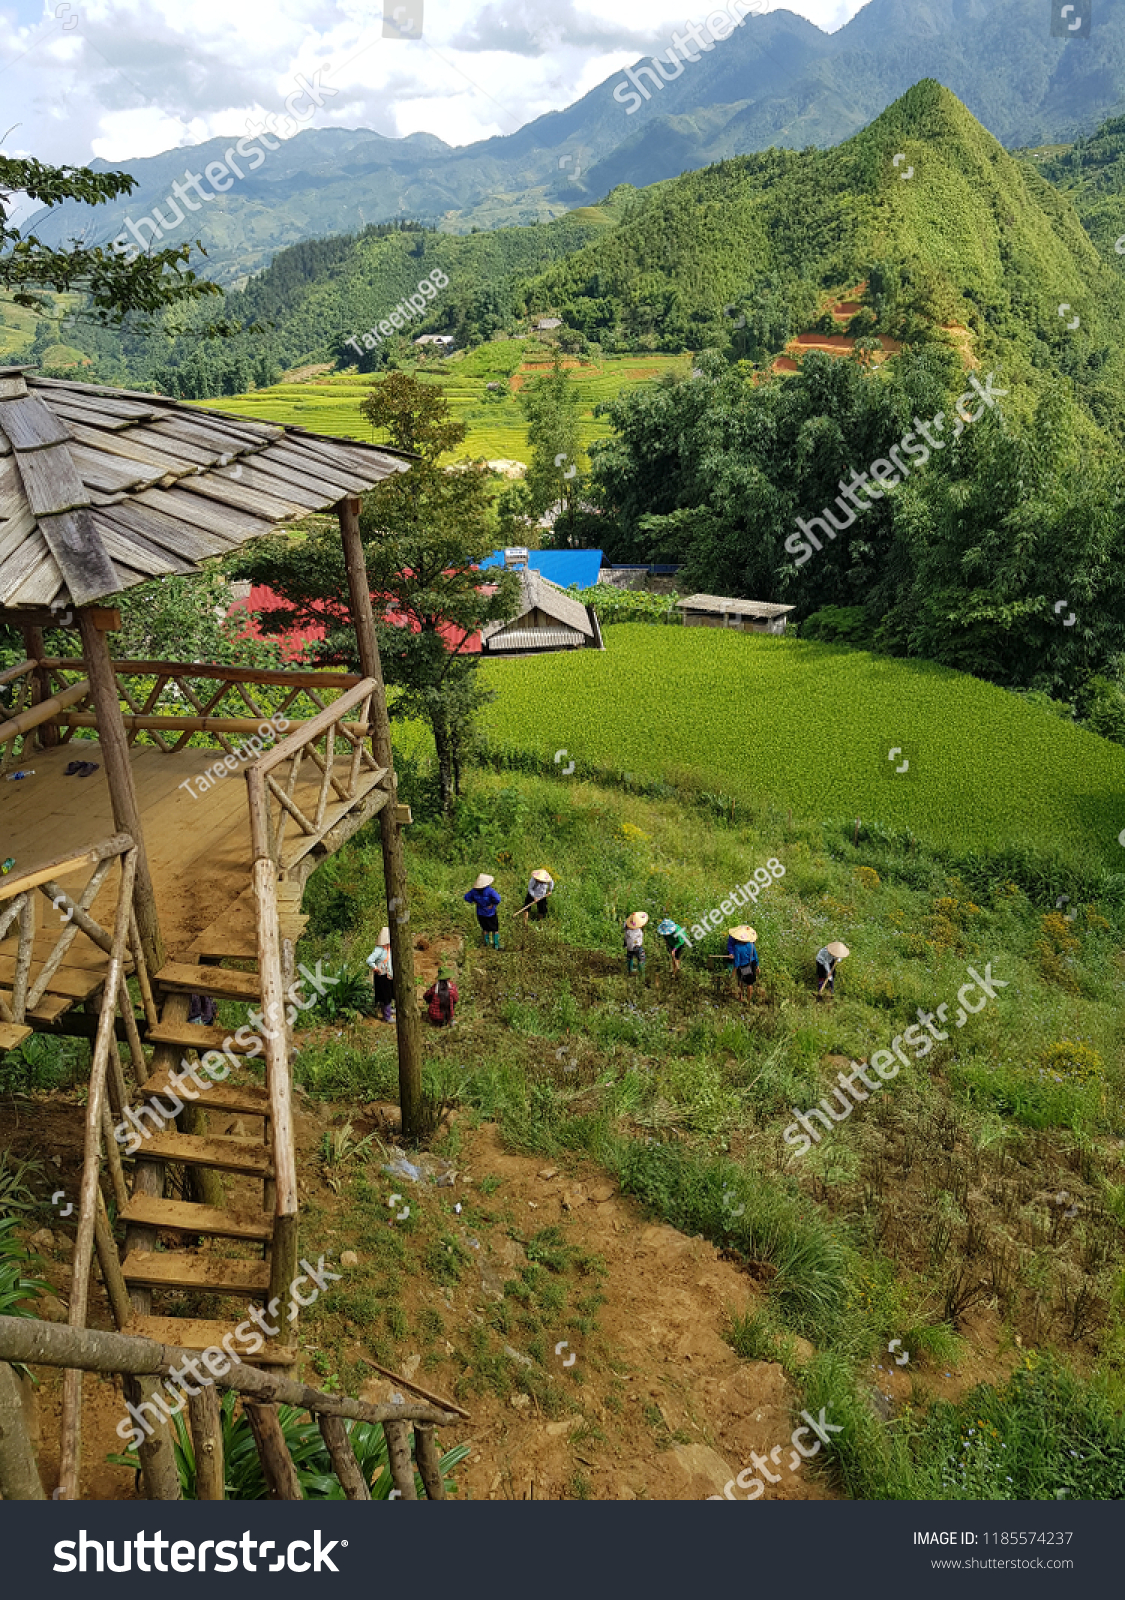 agriculture on the hill at Sapa vietnam #1185574237